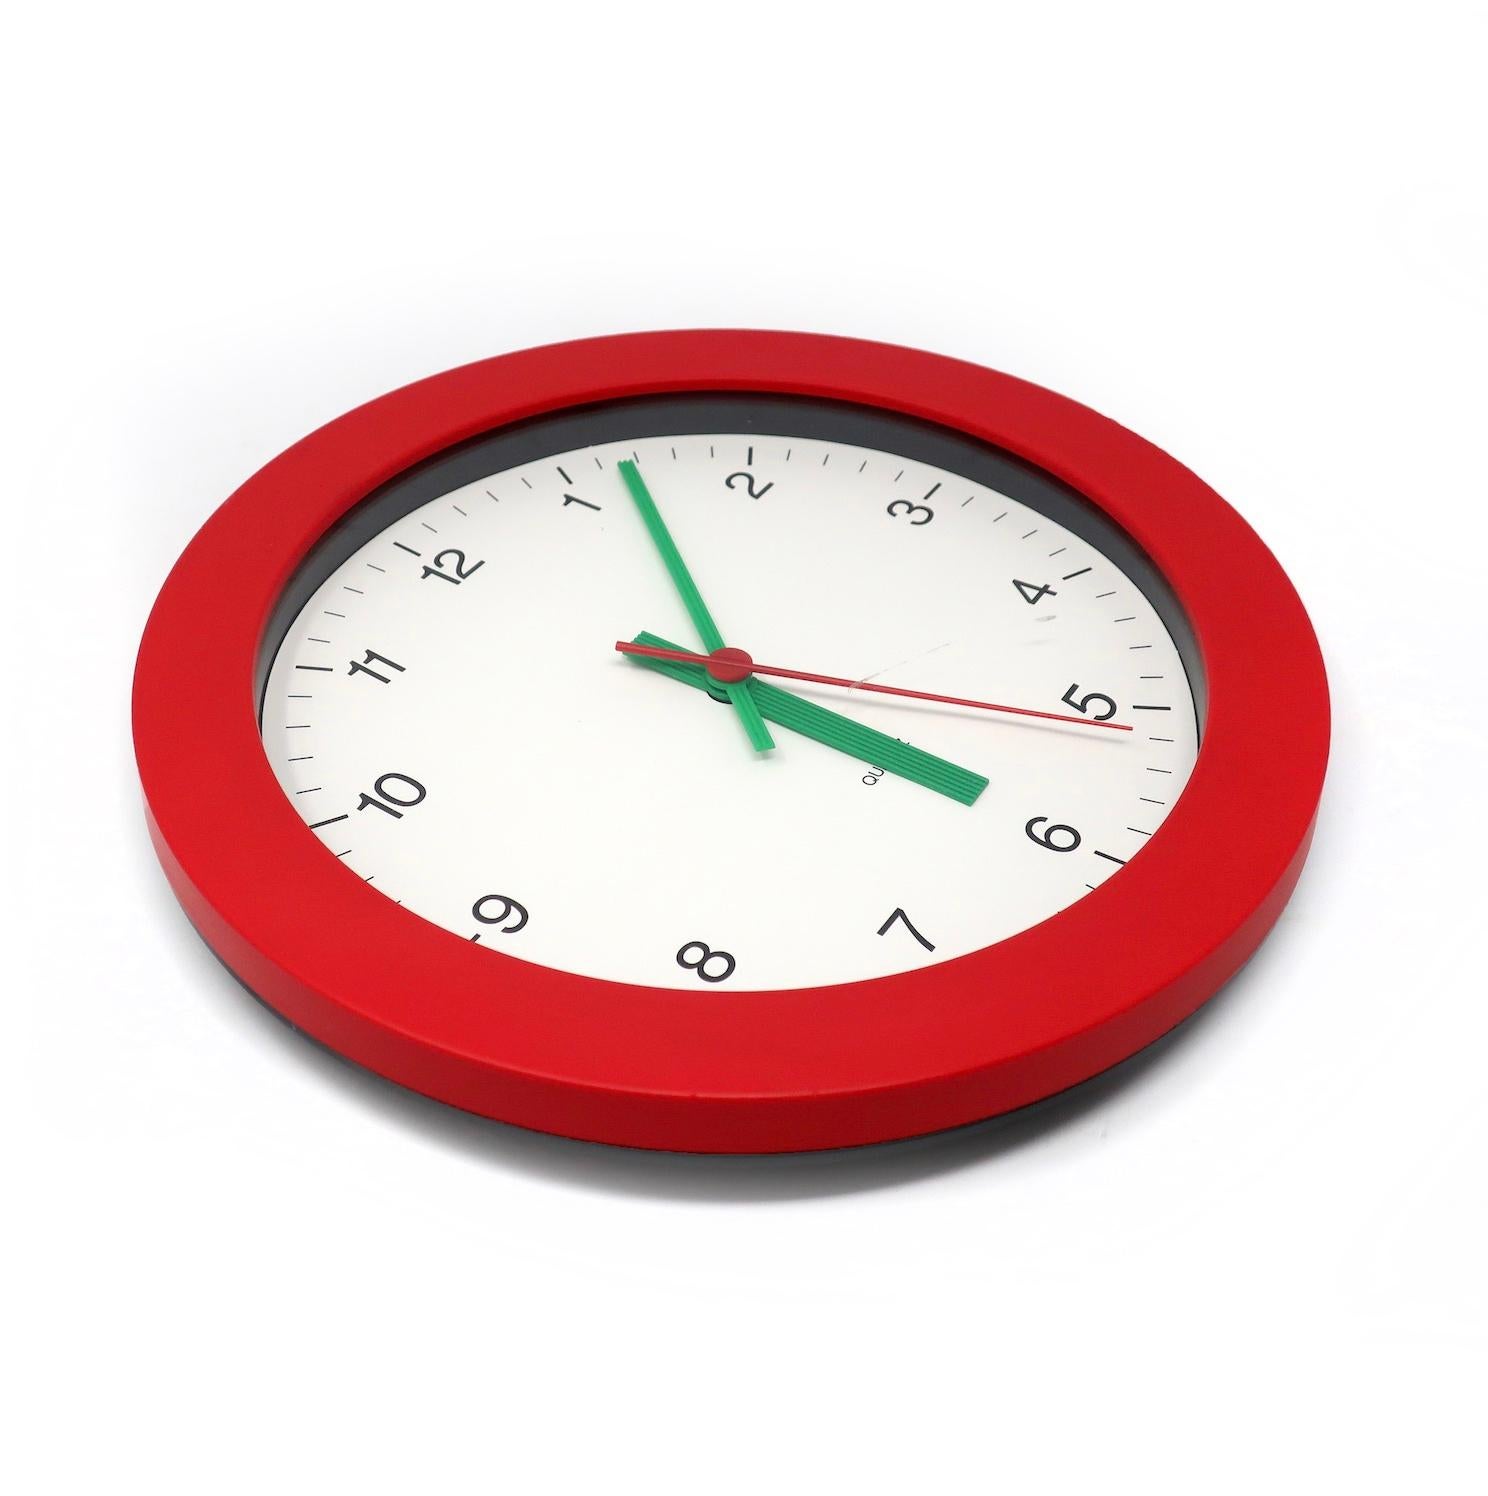 A simple and beautiful 1980s postmodern wall clock by famed German clockmaker Junghans. Red frame, white face with black numbers, and textured green hands. Striking contrast of colors and fantastic pop of colors!

In good vintage condition with wear